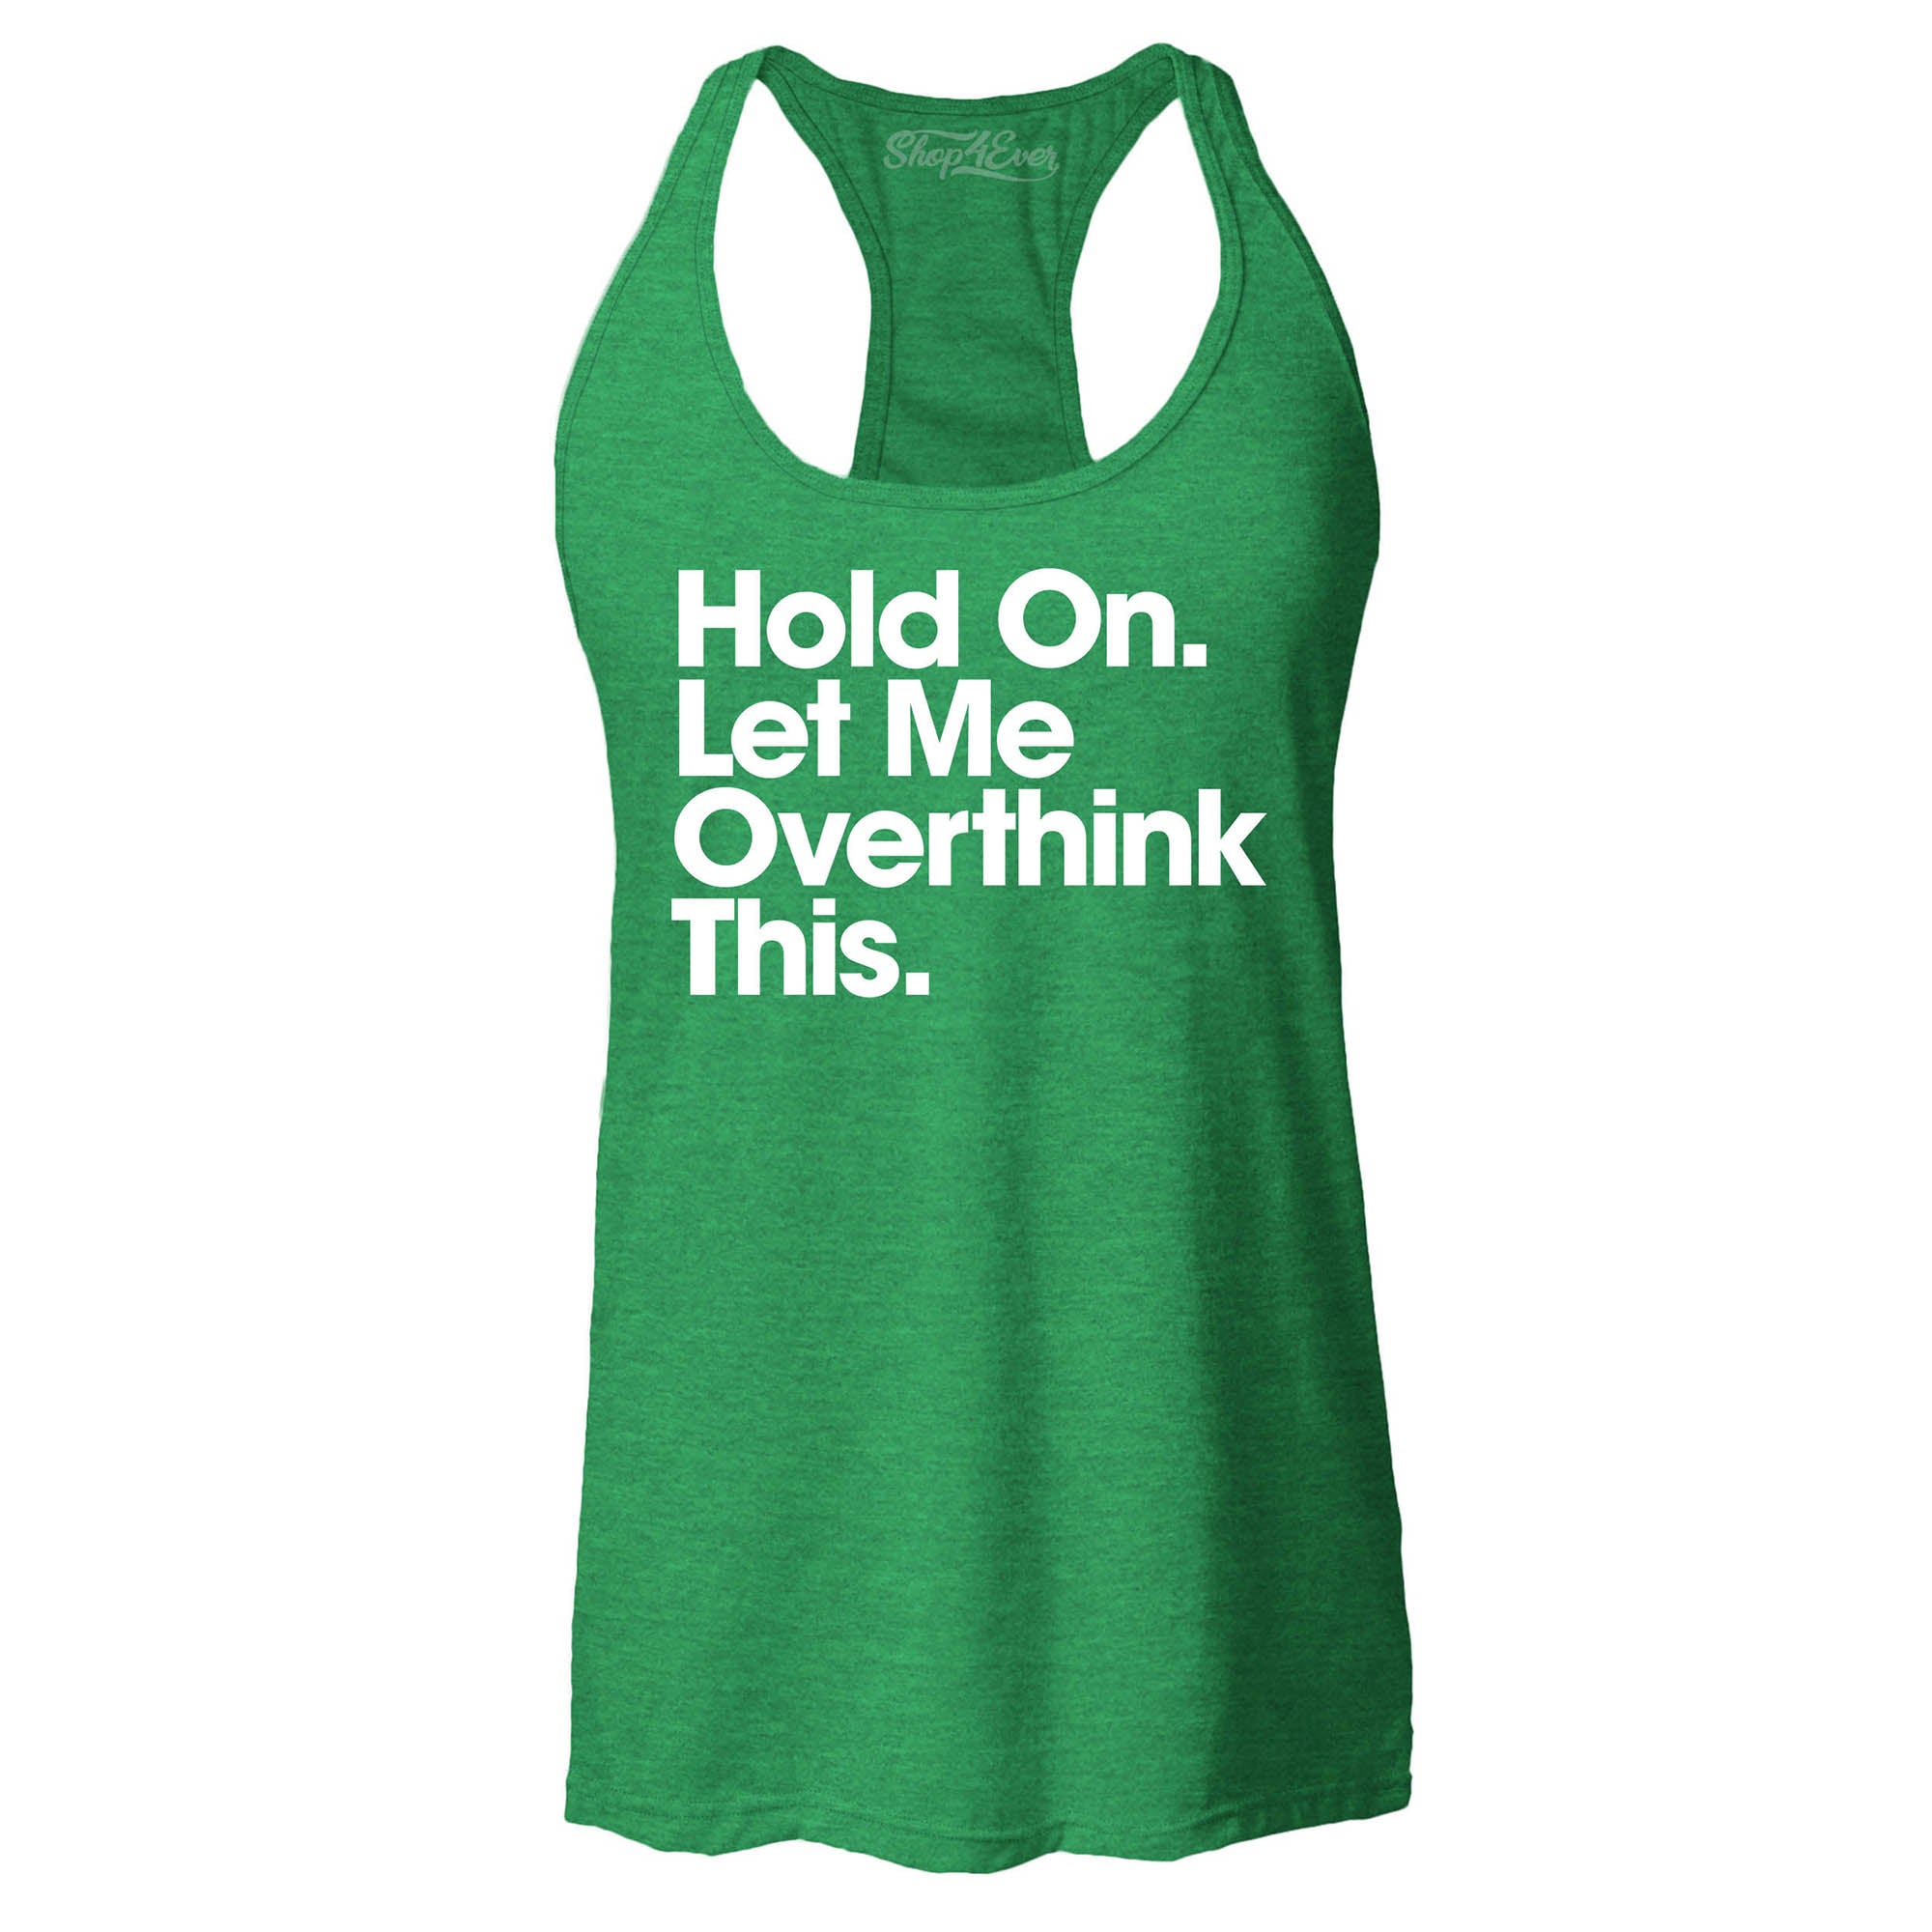 Hold On. Let Me Overthink This. Women's Racerback Tank Top Slim Fit